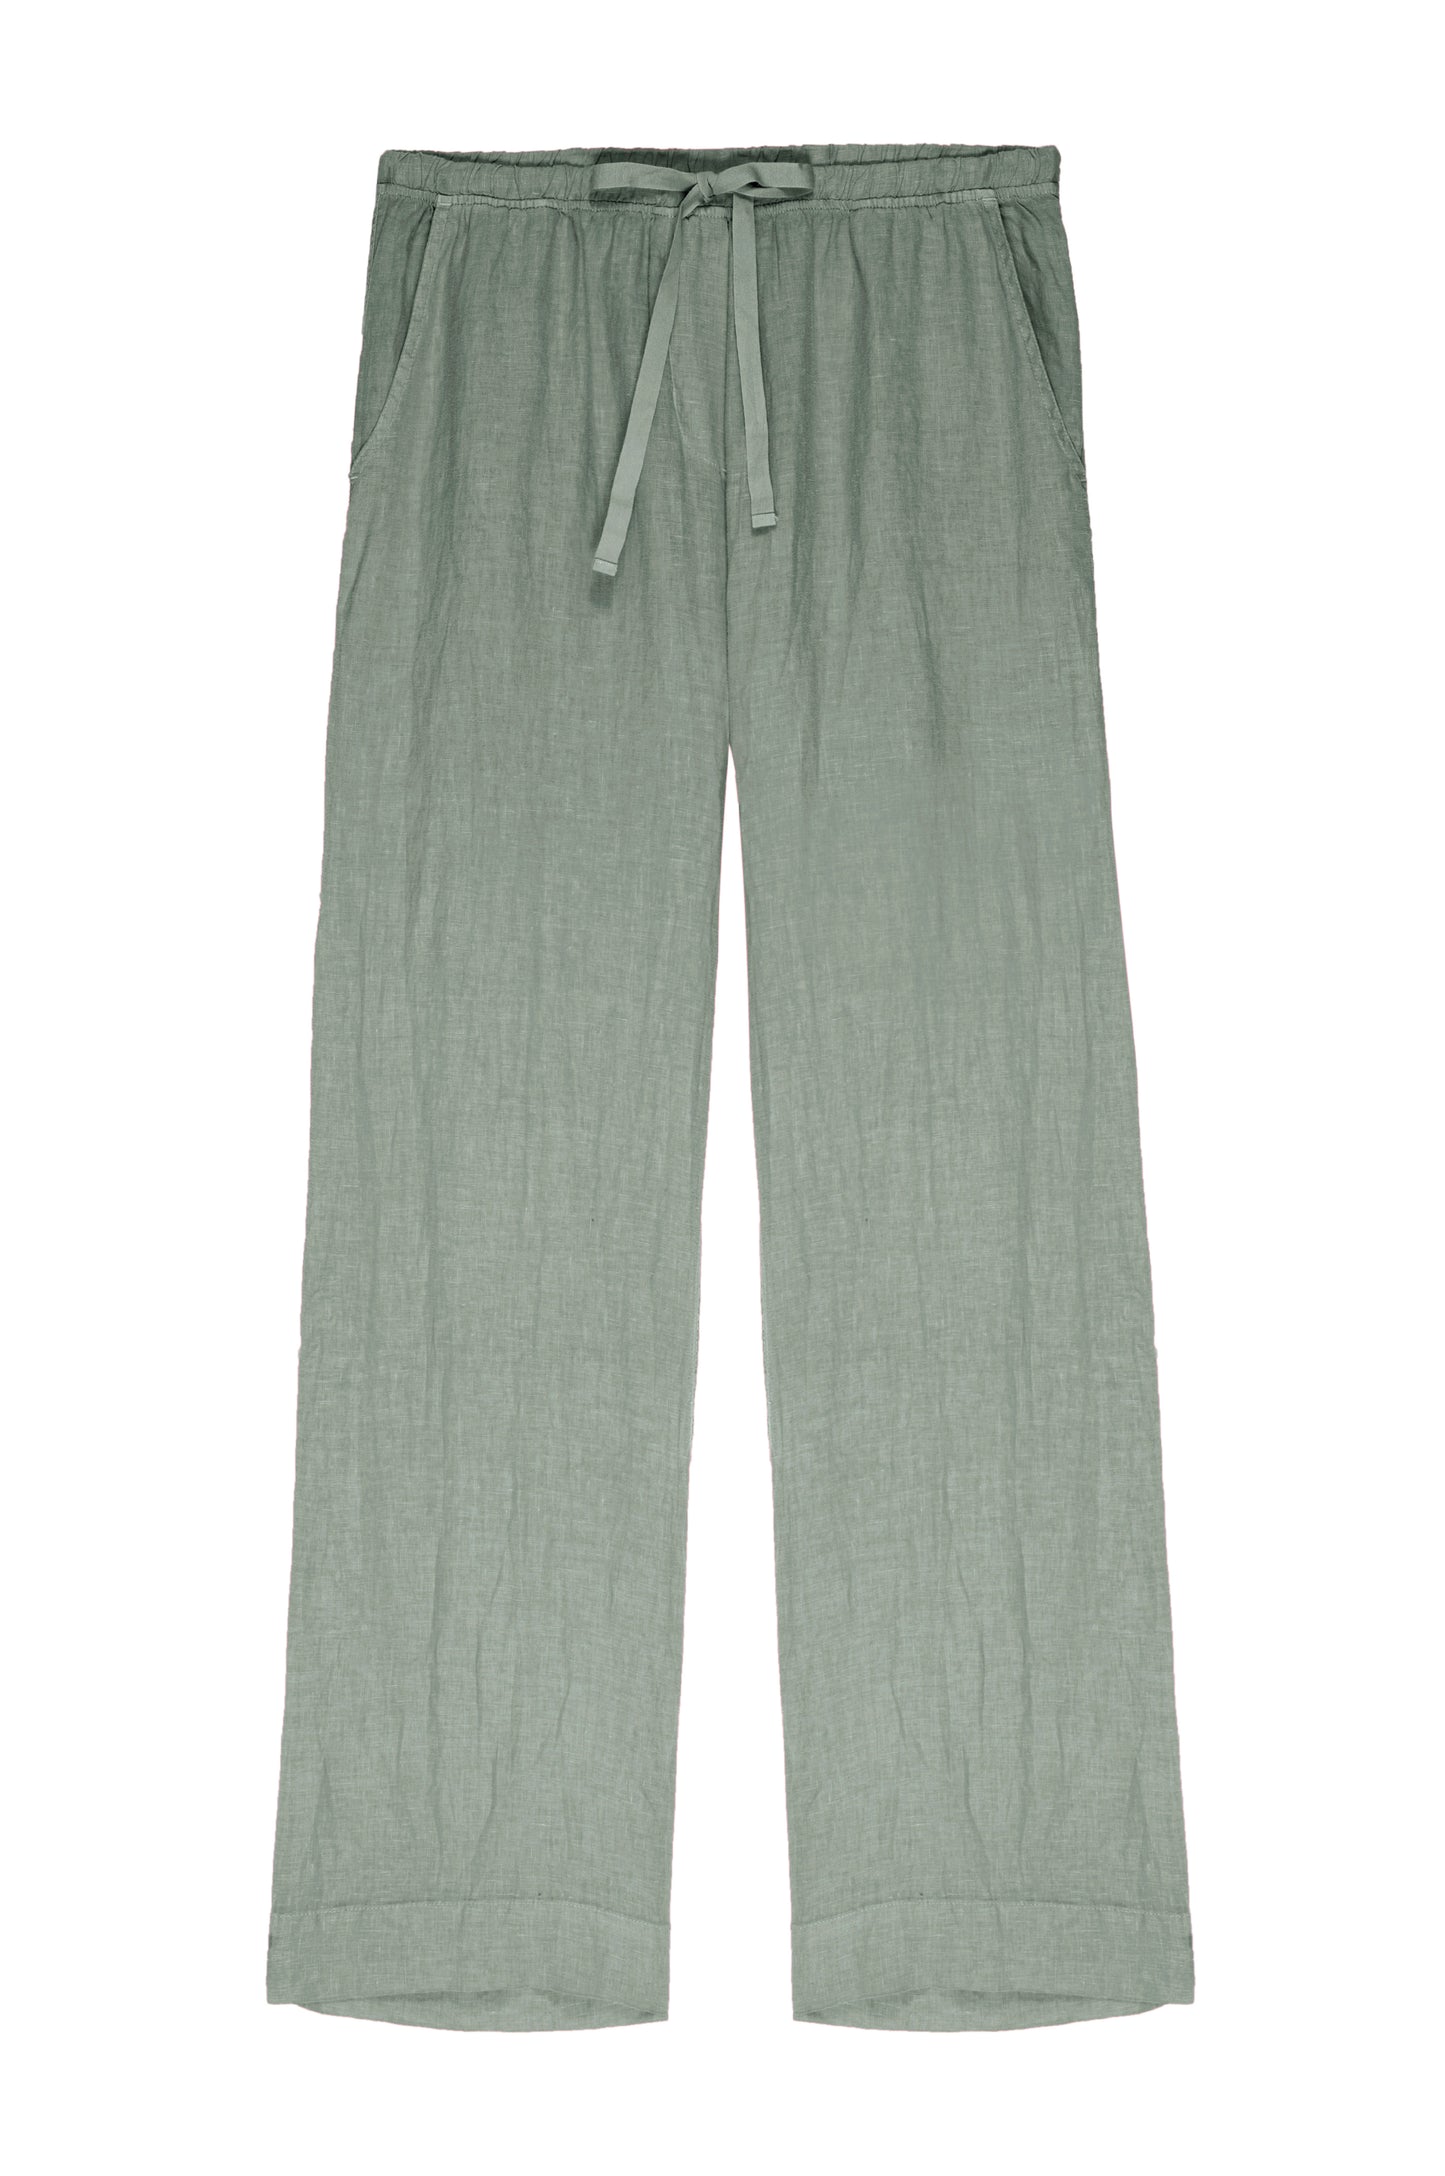 a women's Velvet by Jenny Graham green linen PICO pant with a drawstring.-26293120663745